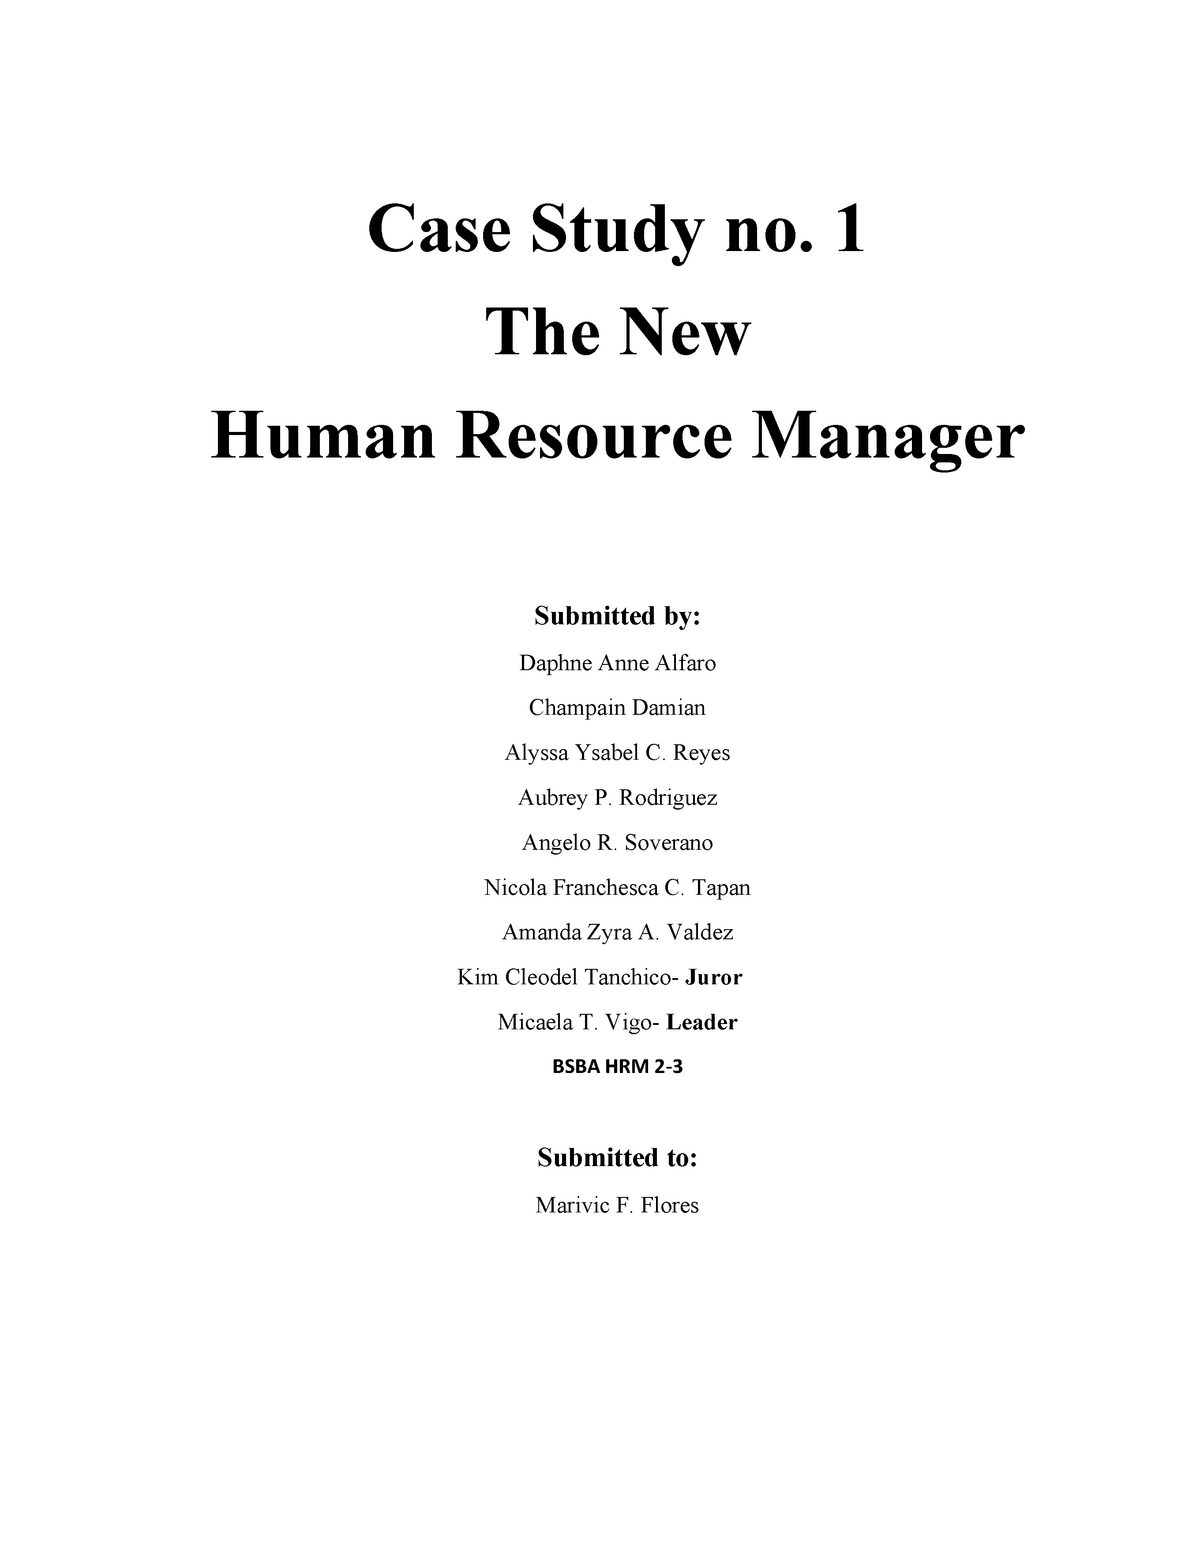 a case study on human resource management